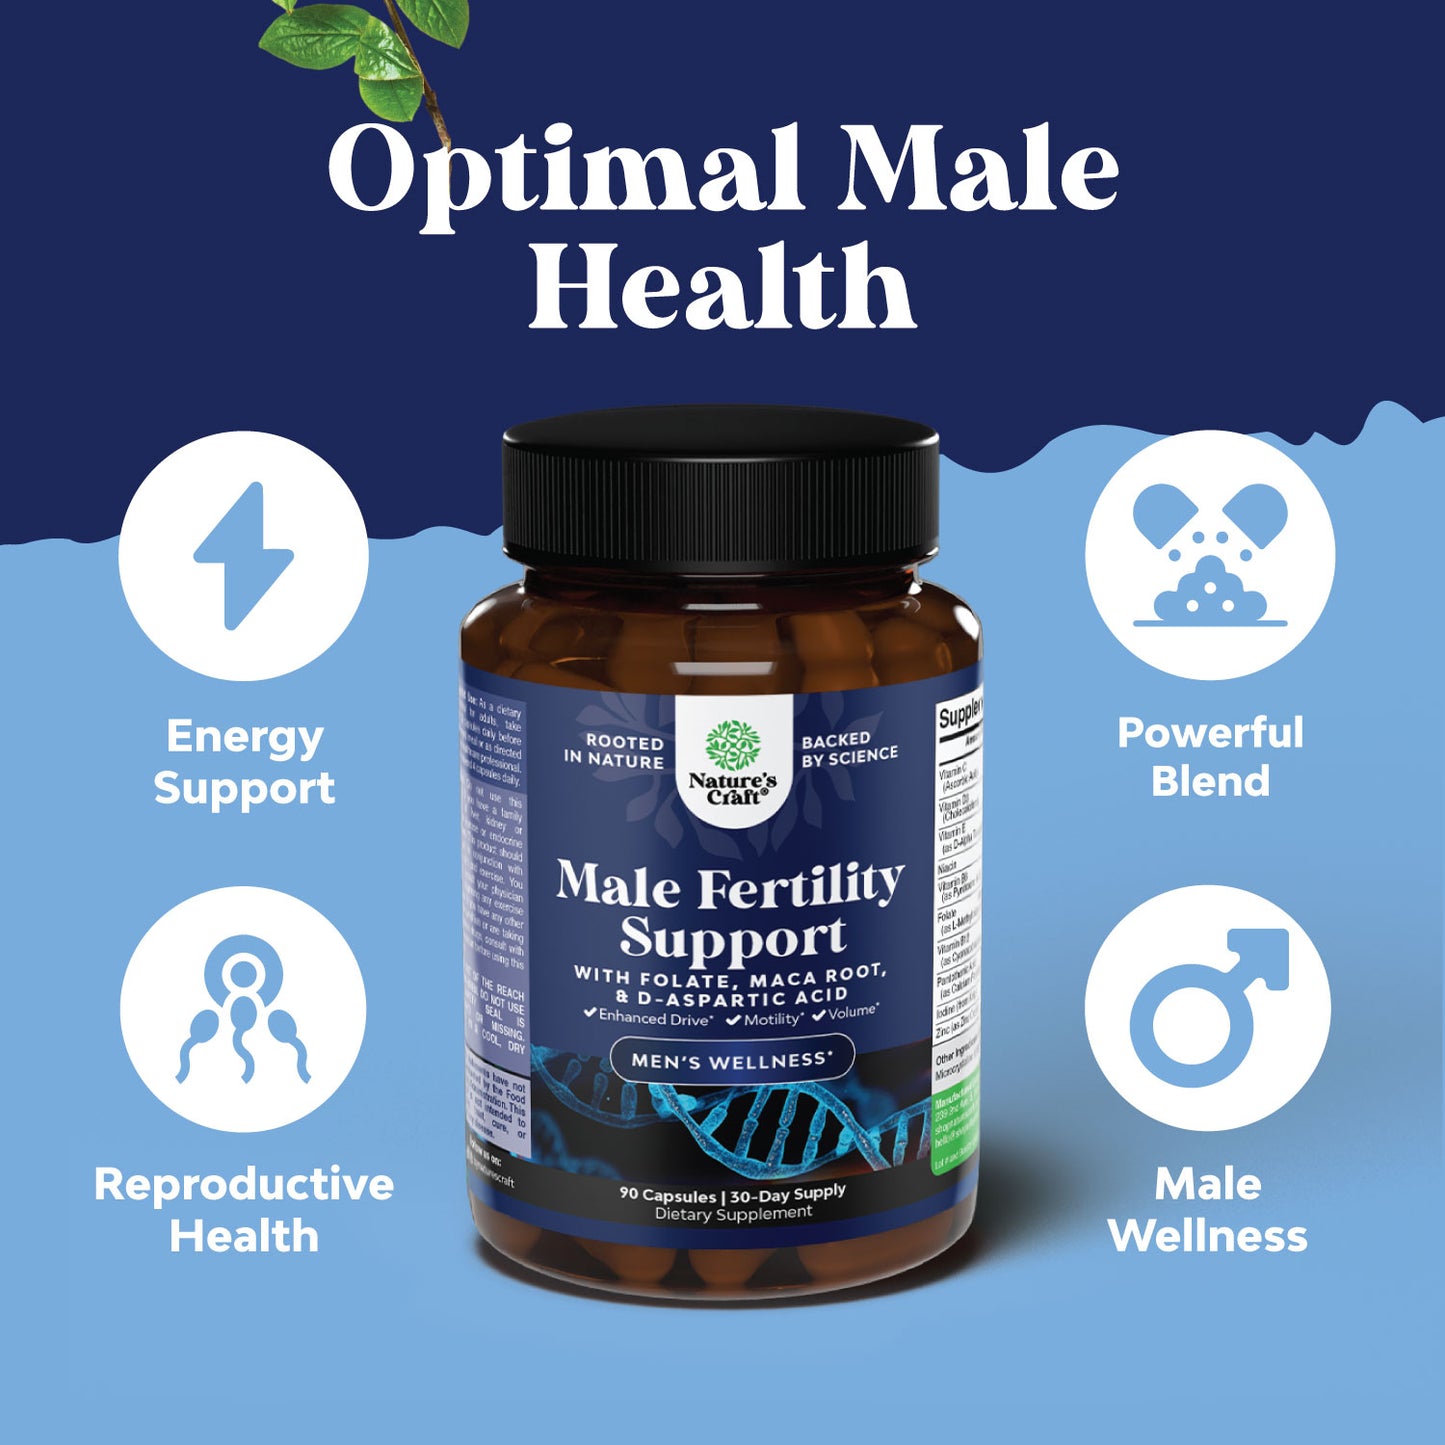 Male Fertility Support - 90 Capsules